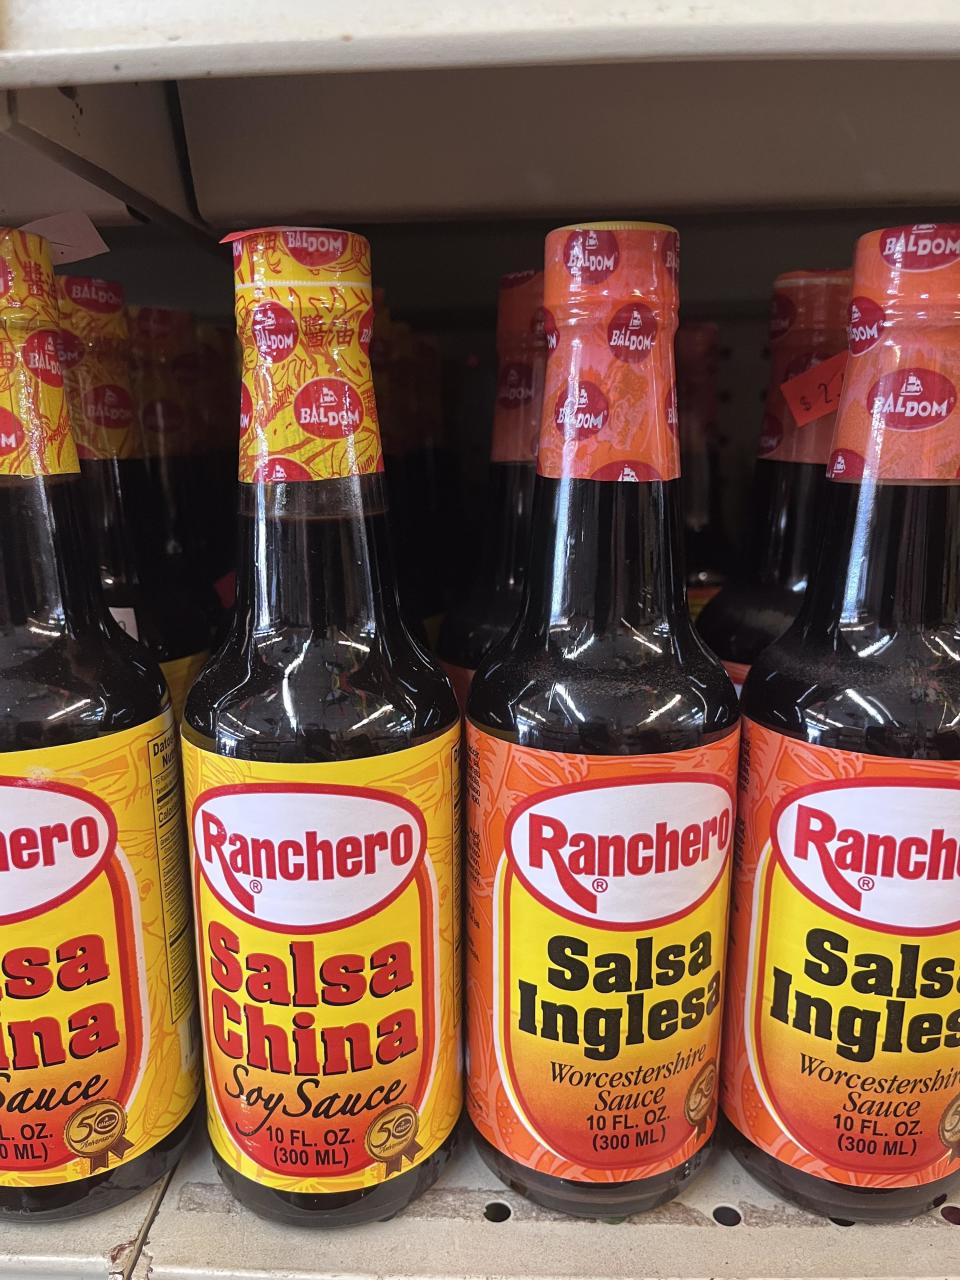 Bottles of salsa inglesa Worcestershire sauce and salsa China soy sauce on shelves